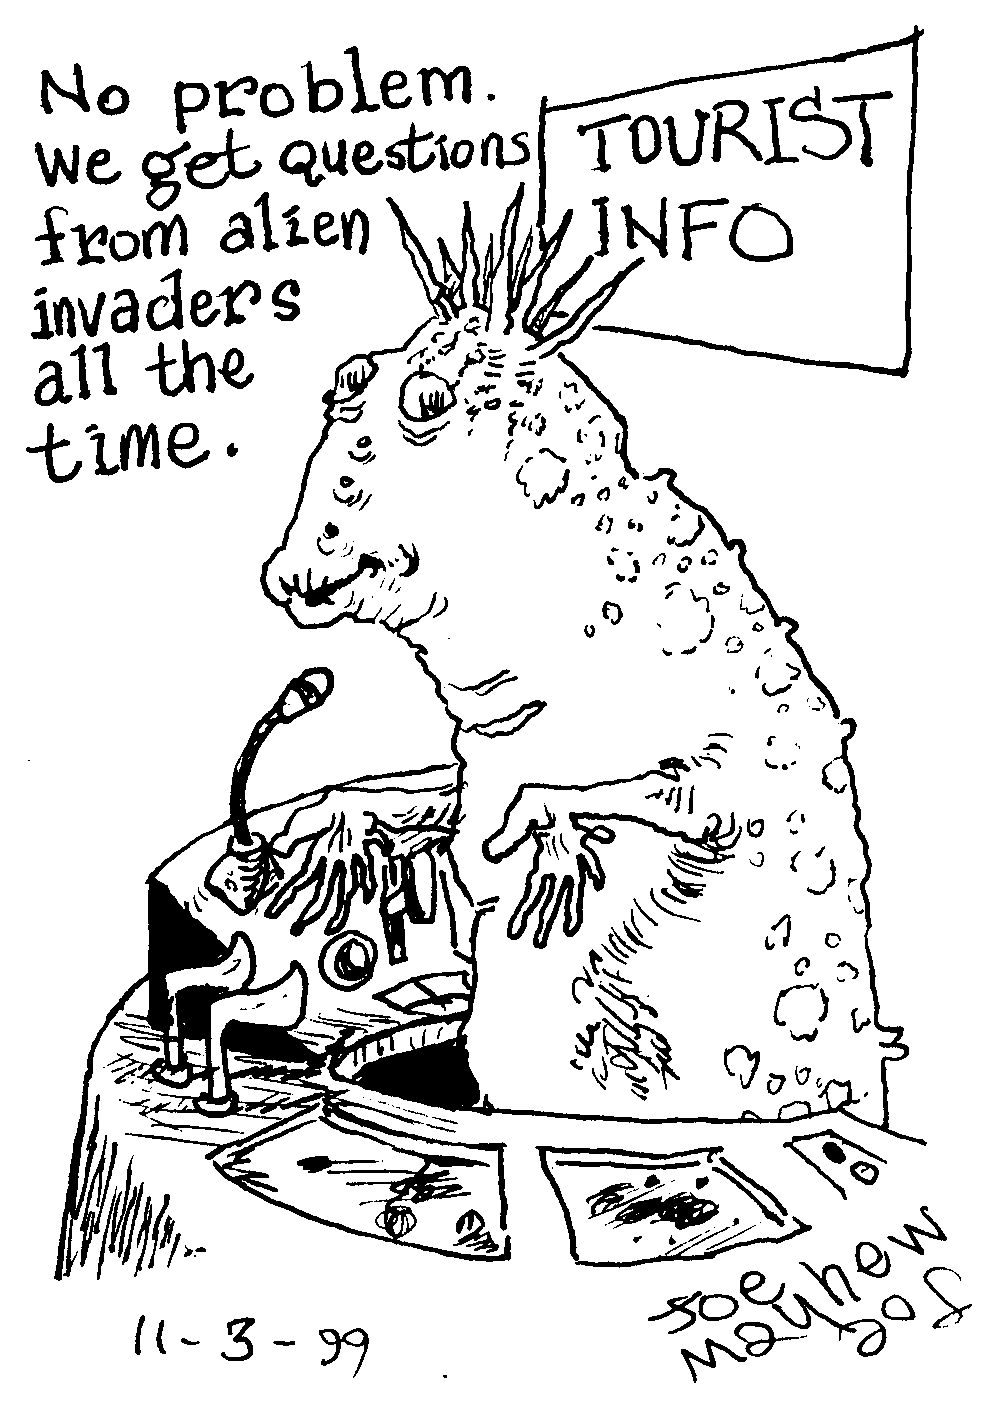  [Questions from Aliens] 